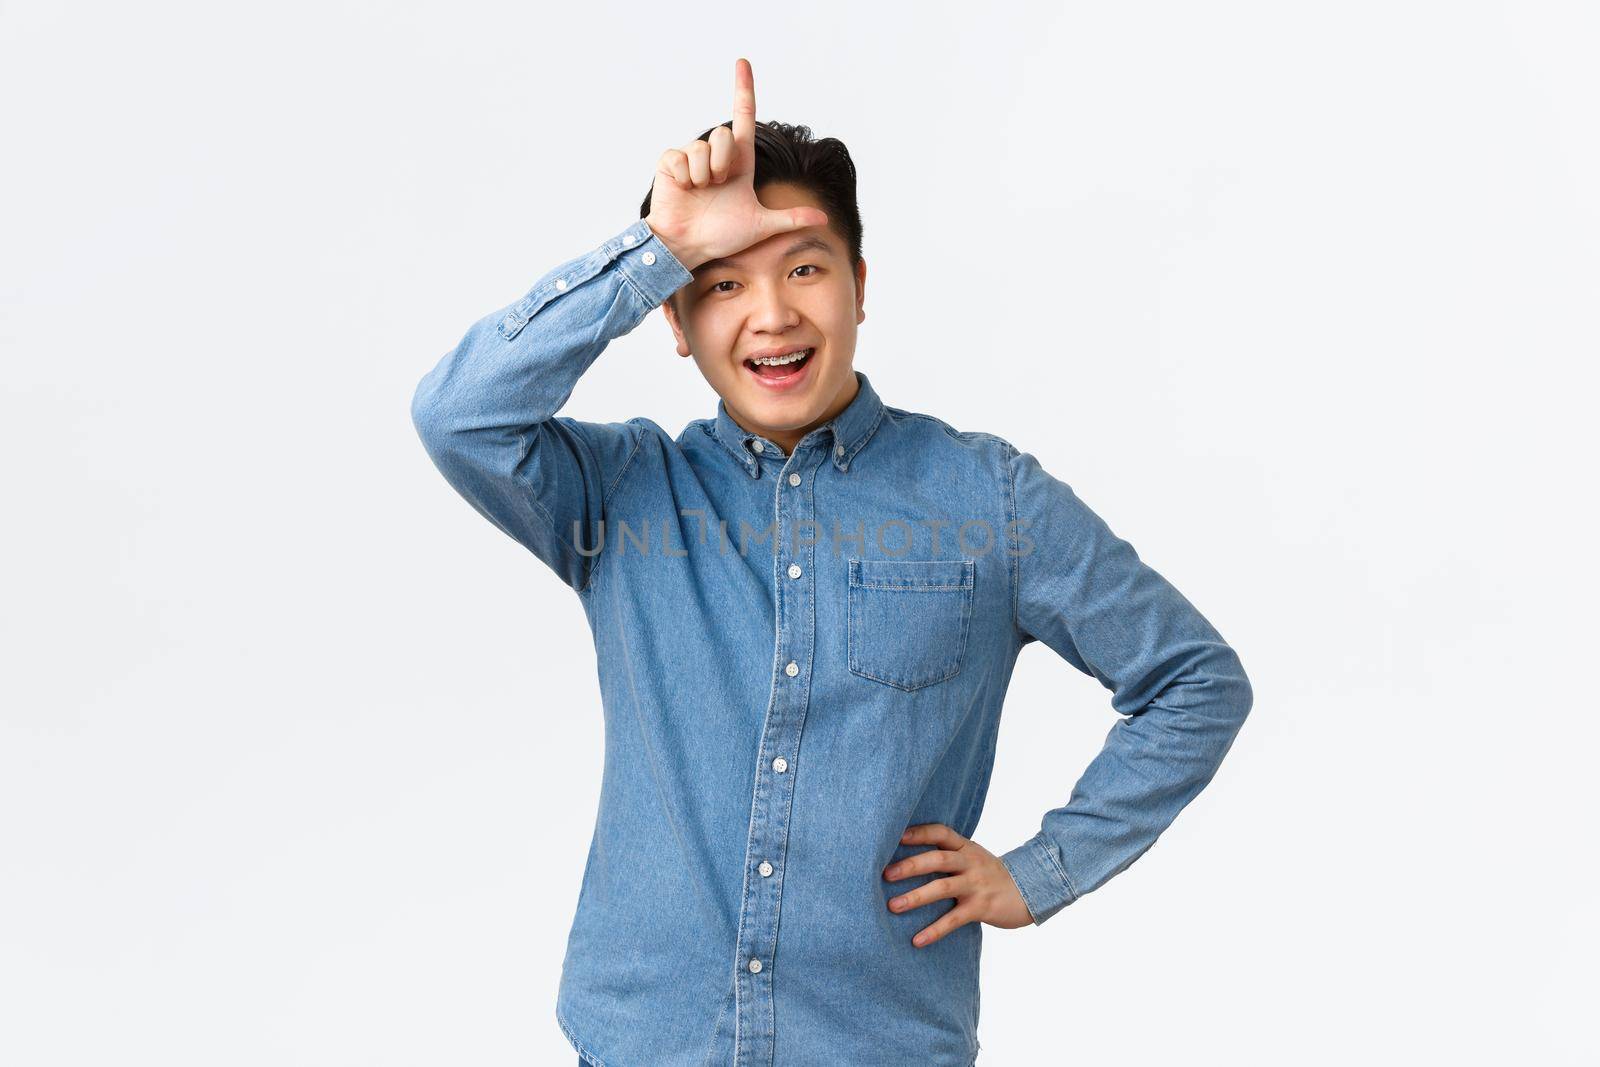 Happy rejoicing asian guy mocking lost team, showing loser gesture and smiling, making fun of rival, standing satisfied and proud of winning over white background, laughing arrogant.